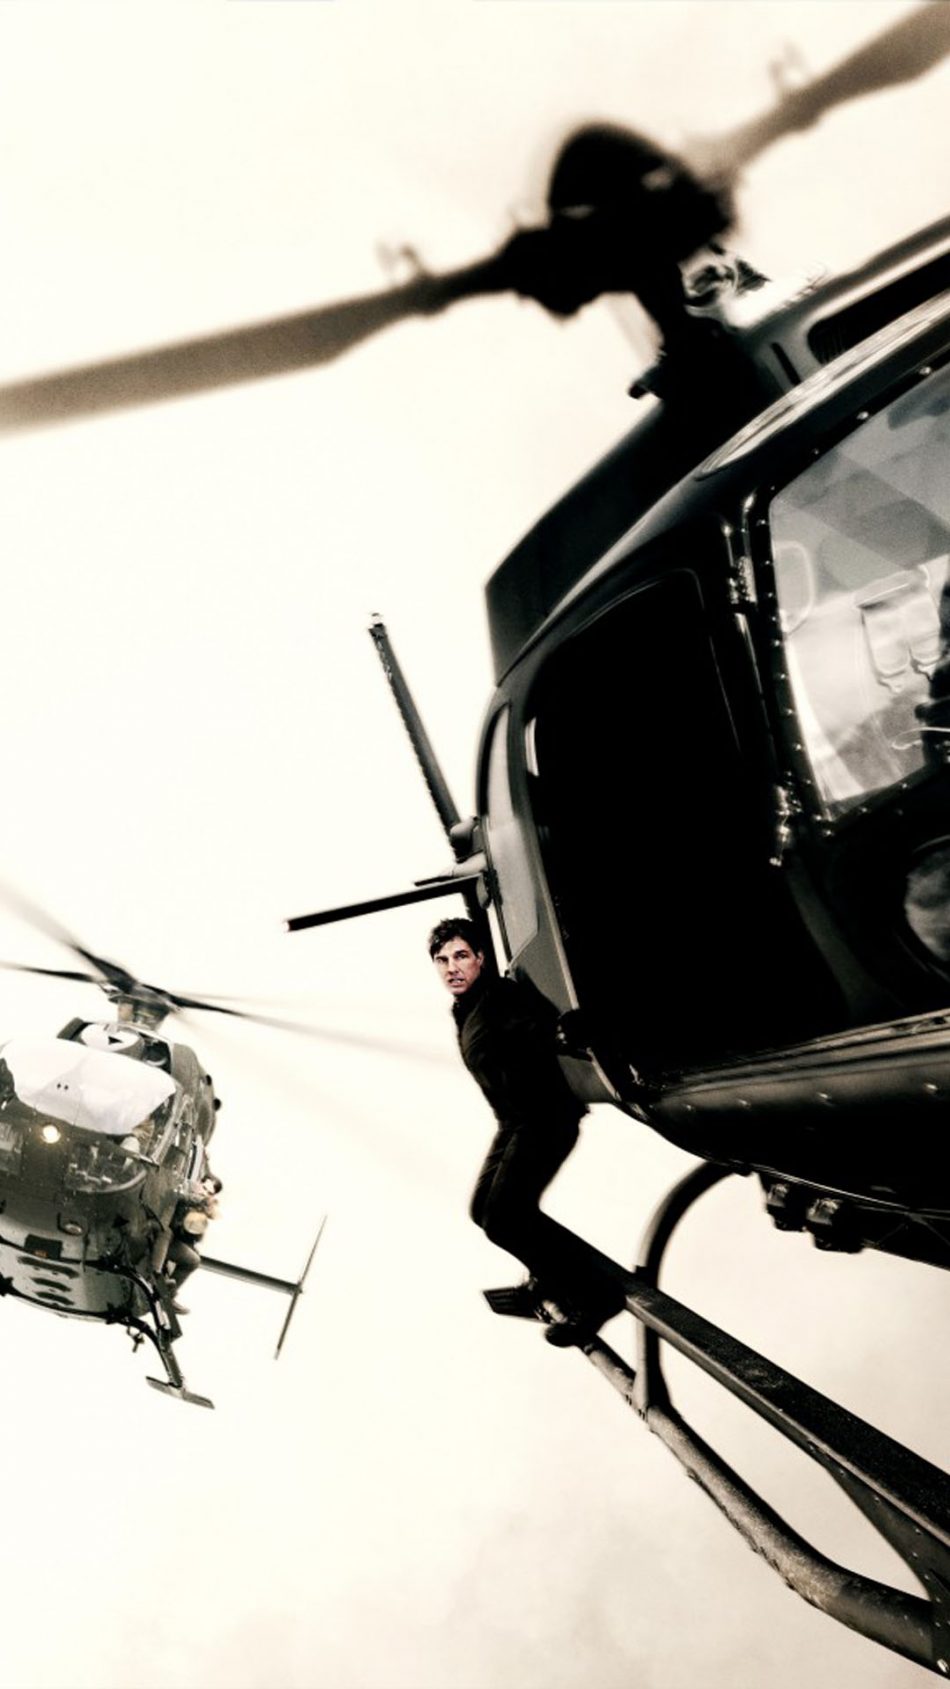 Tom Cruise Chopper Action In Mission Impossible Fallout - Movie Mission Impossible Fallout - HD Wallpaper 